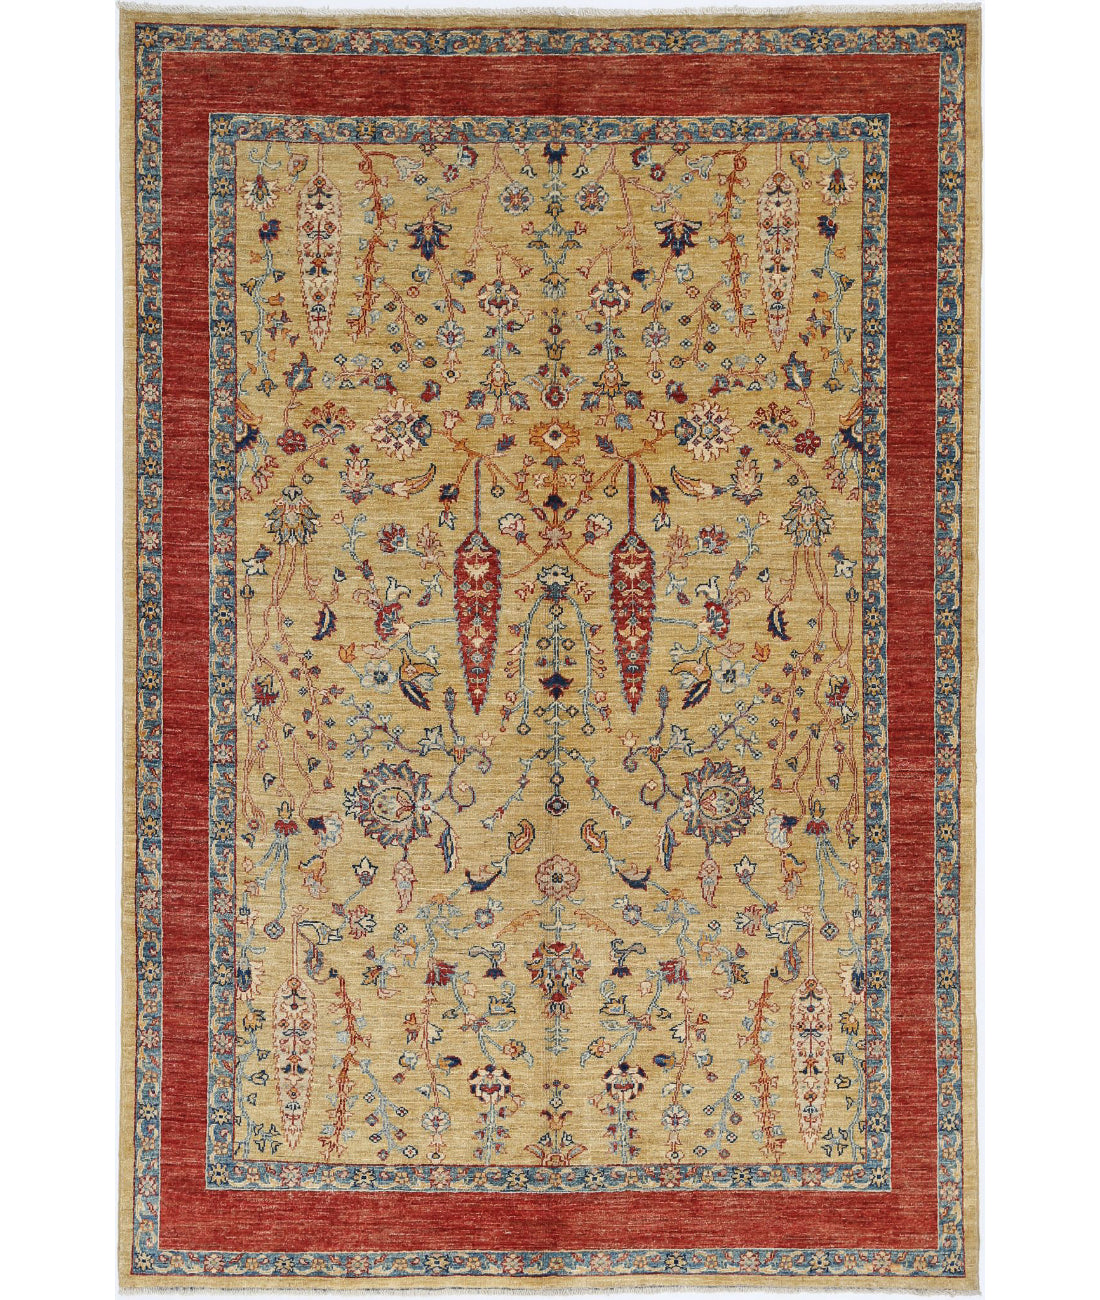 Hand Knotted Bakshaish Wool Rug - 5'6'' x 8'4'' 5'6'' x 8'4'' (165 X 250) / Gold / Red